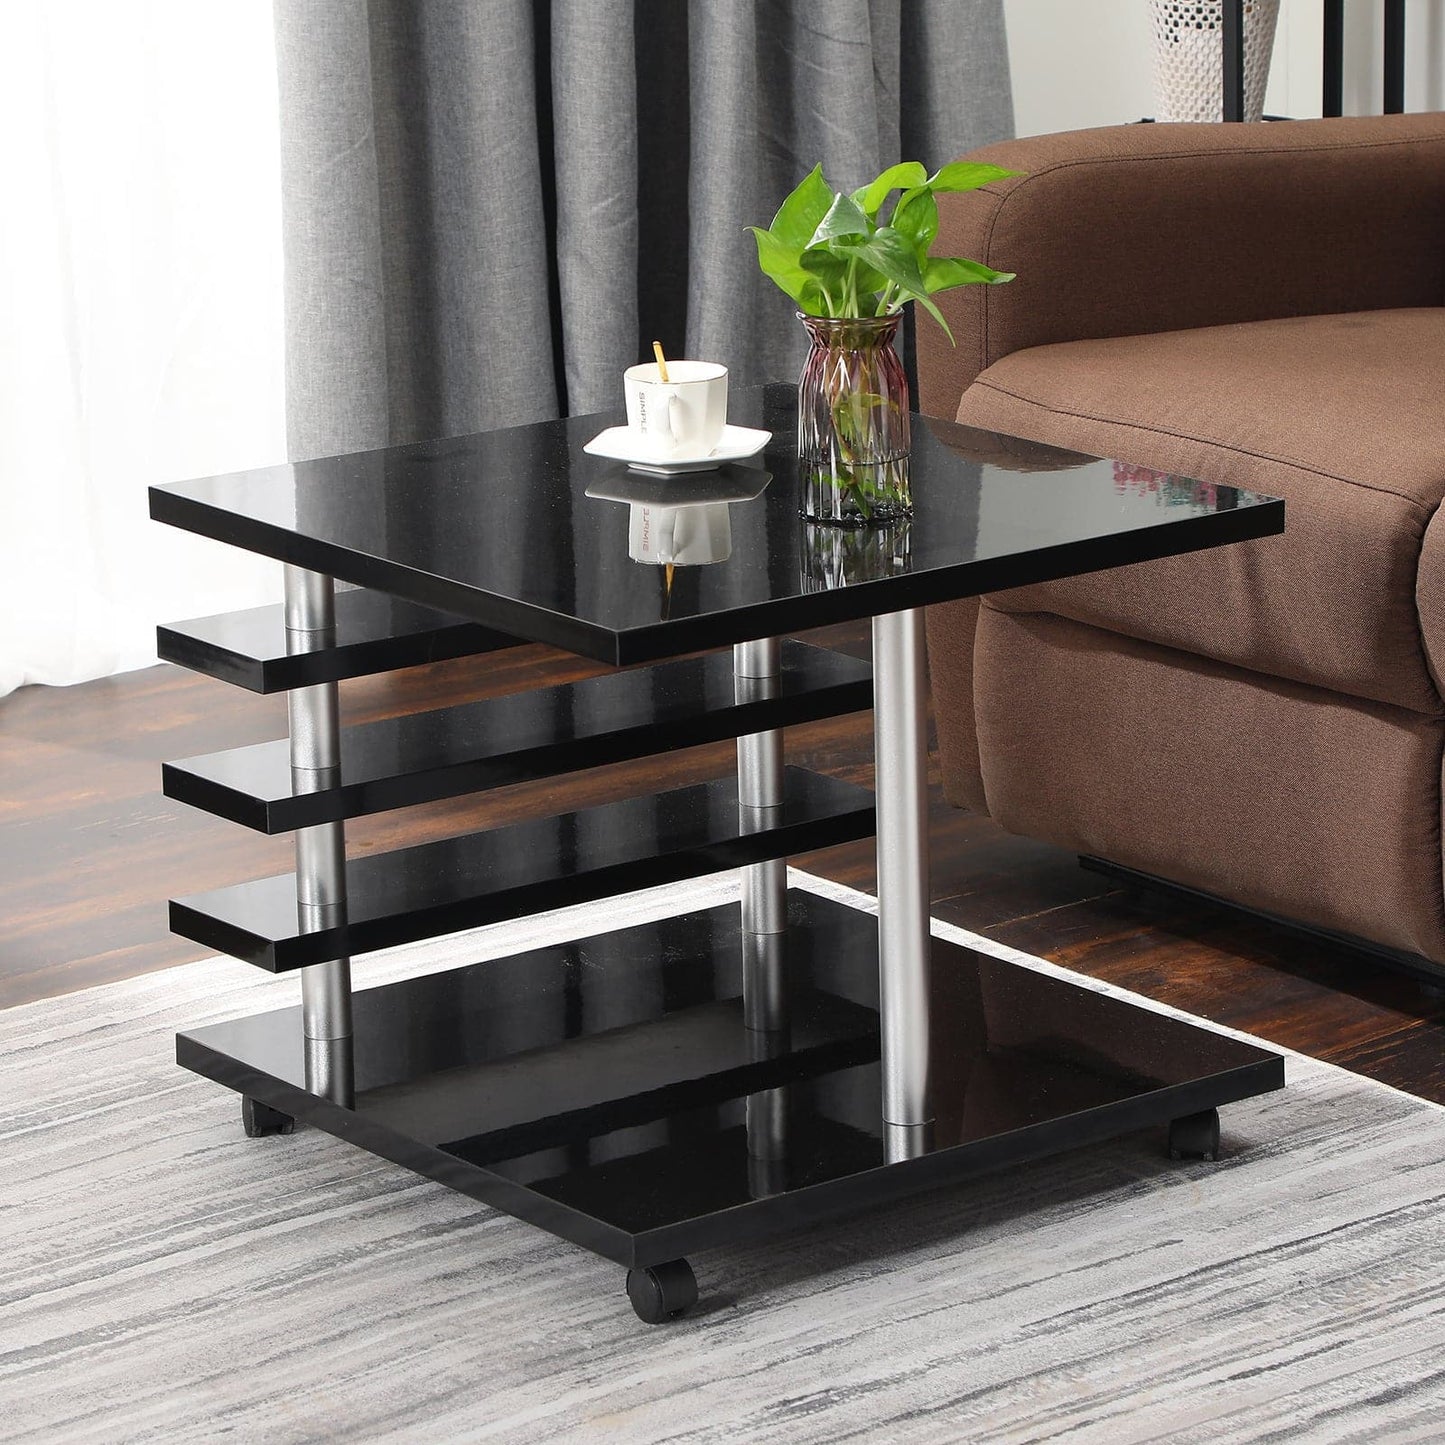 TFC&H Co. Mobile Coffee Table with LED light & Remote Control - Black- Ships from The US - coffee table at TFC&H Co.